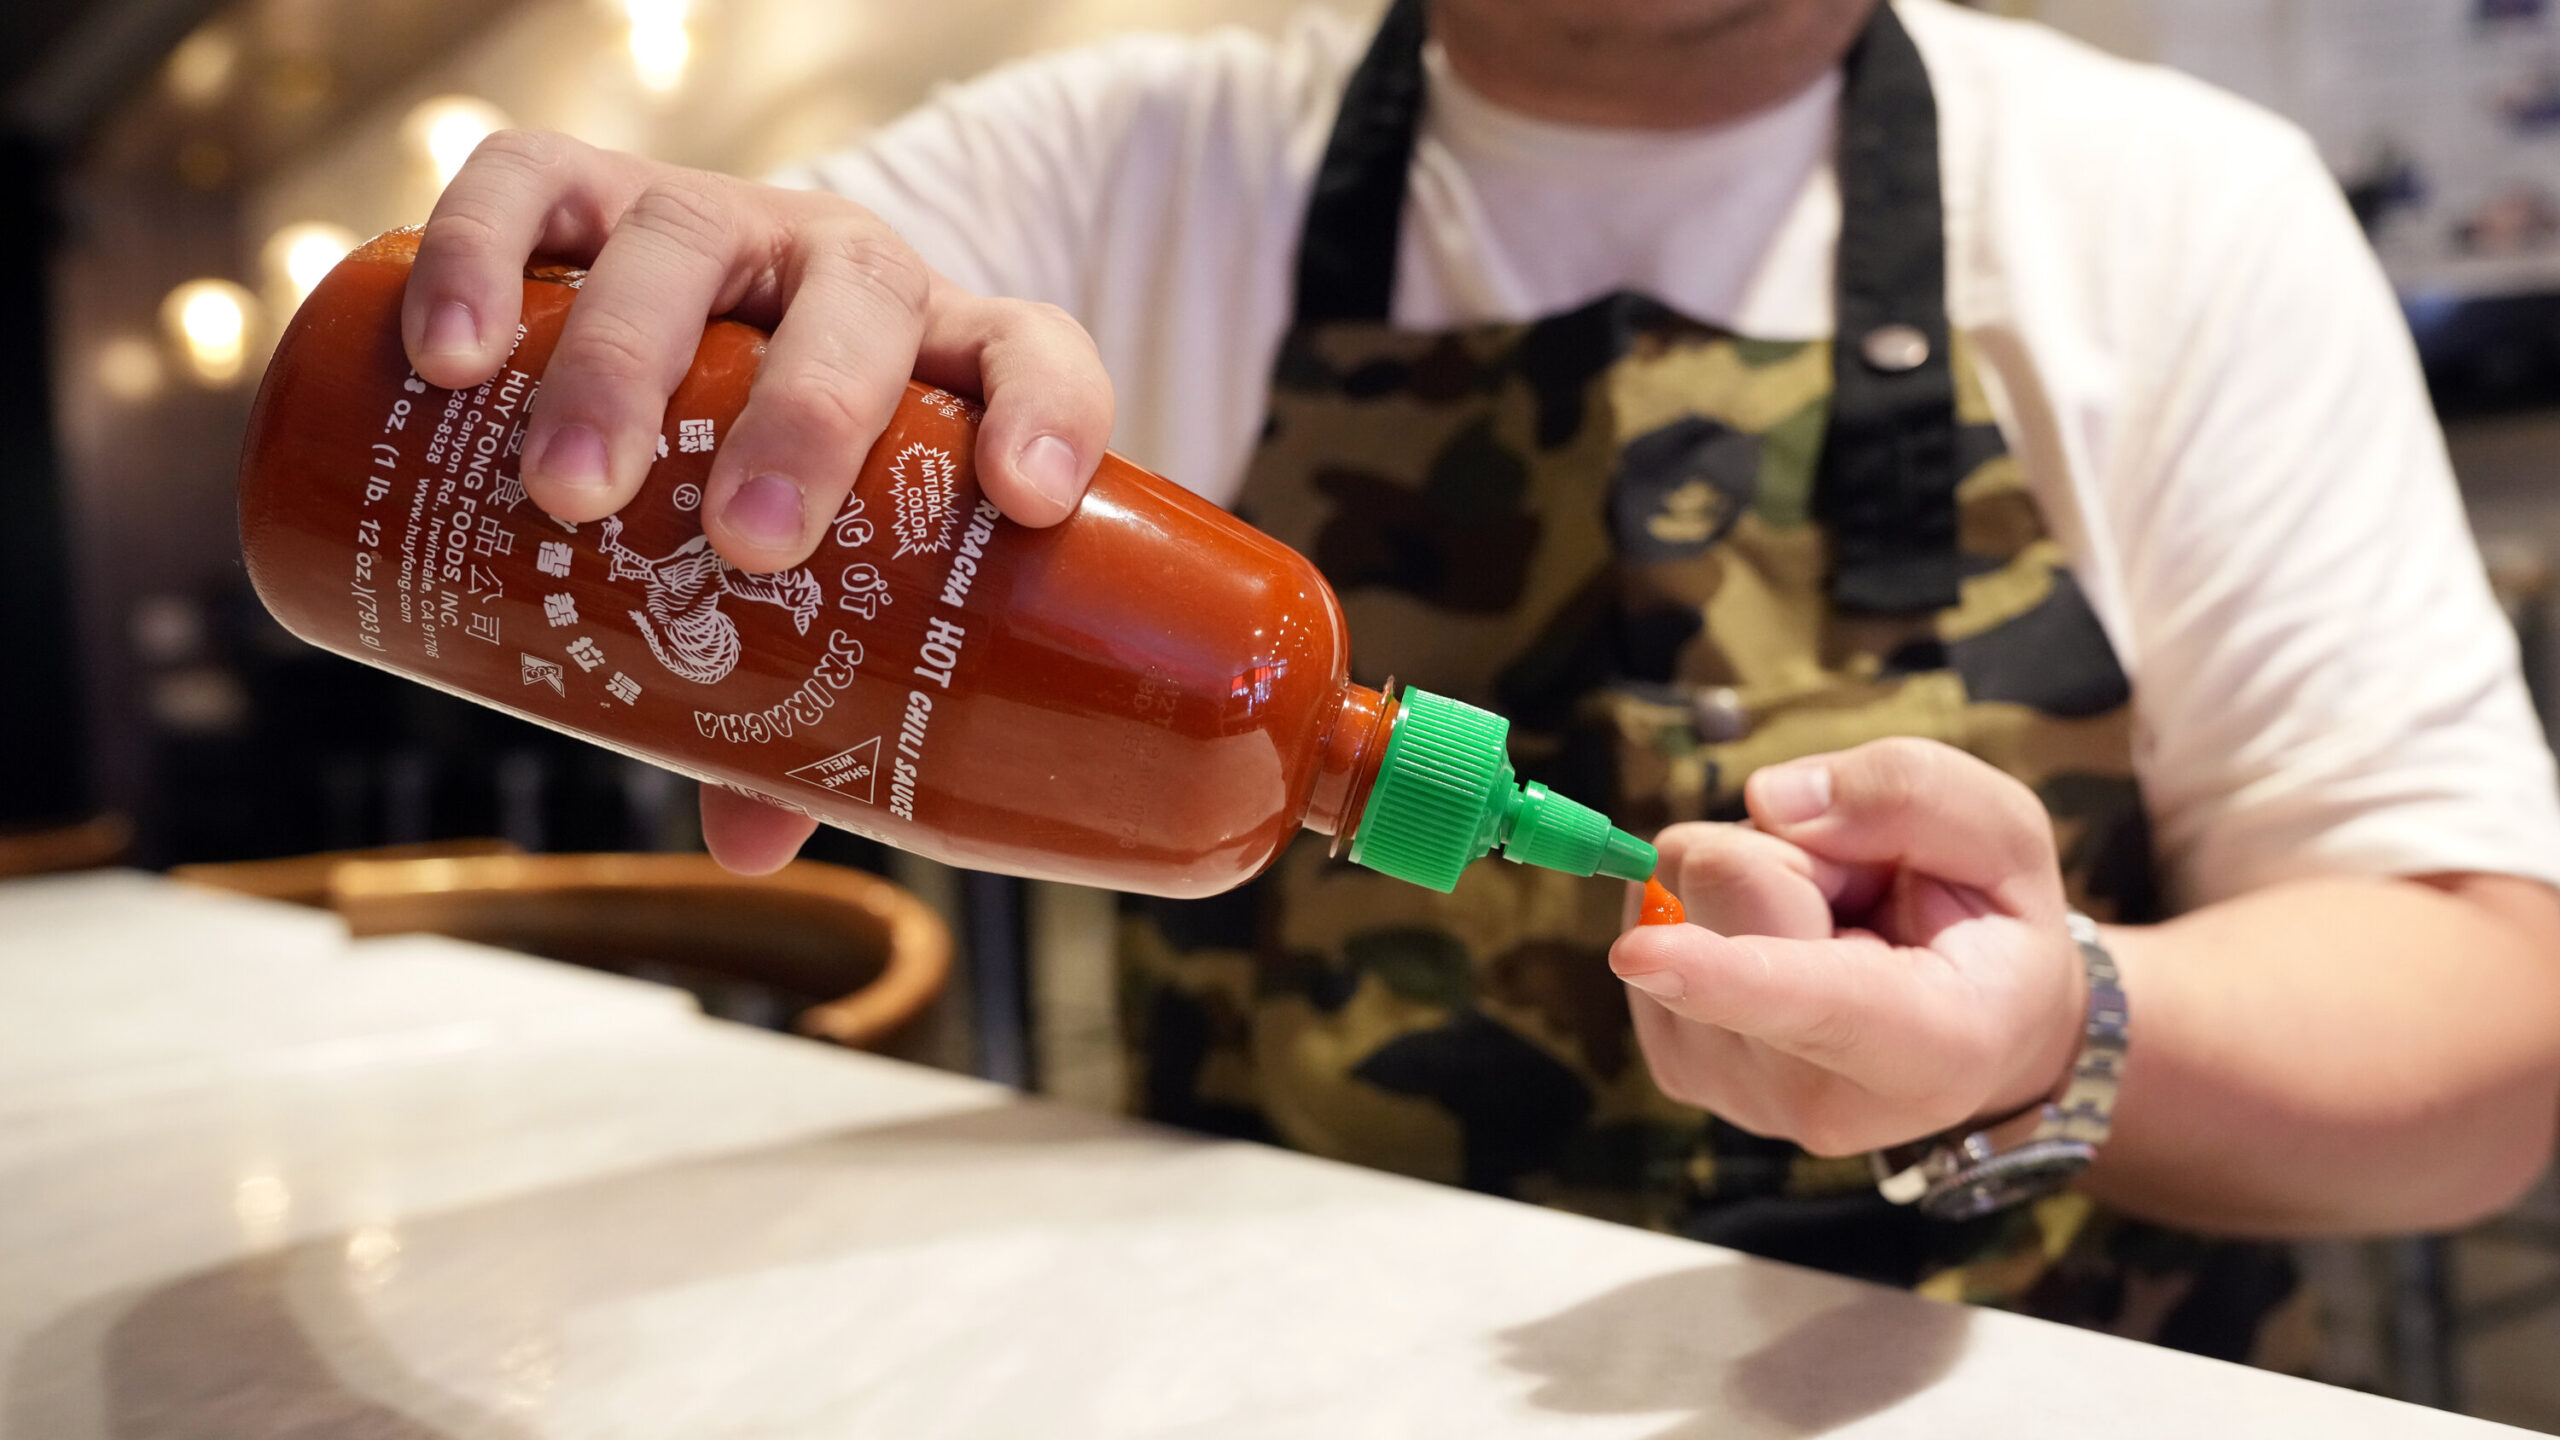 Huy Fong Foods Hits Pause on Sriracha Production, Millions of Fans Are Concerned About a Shortage